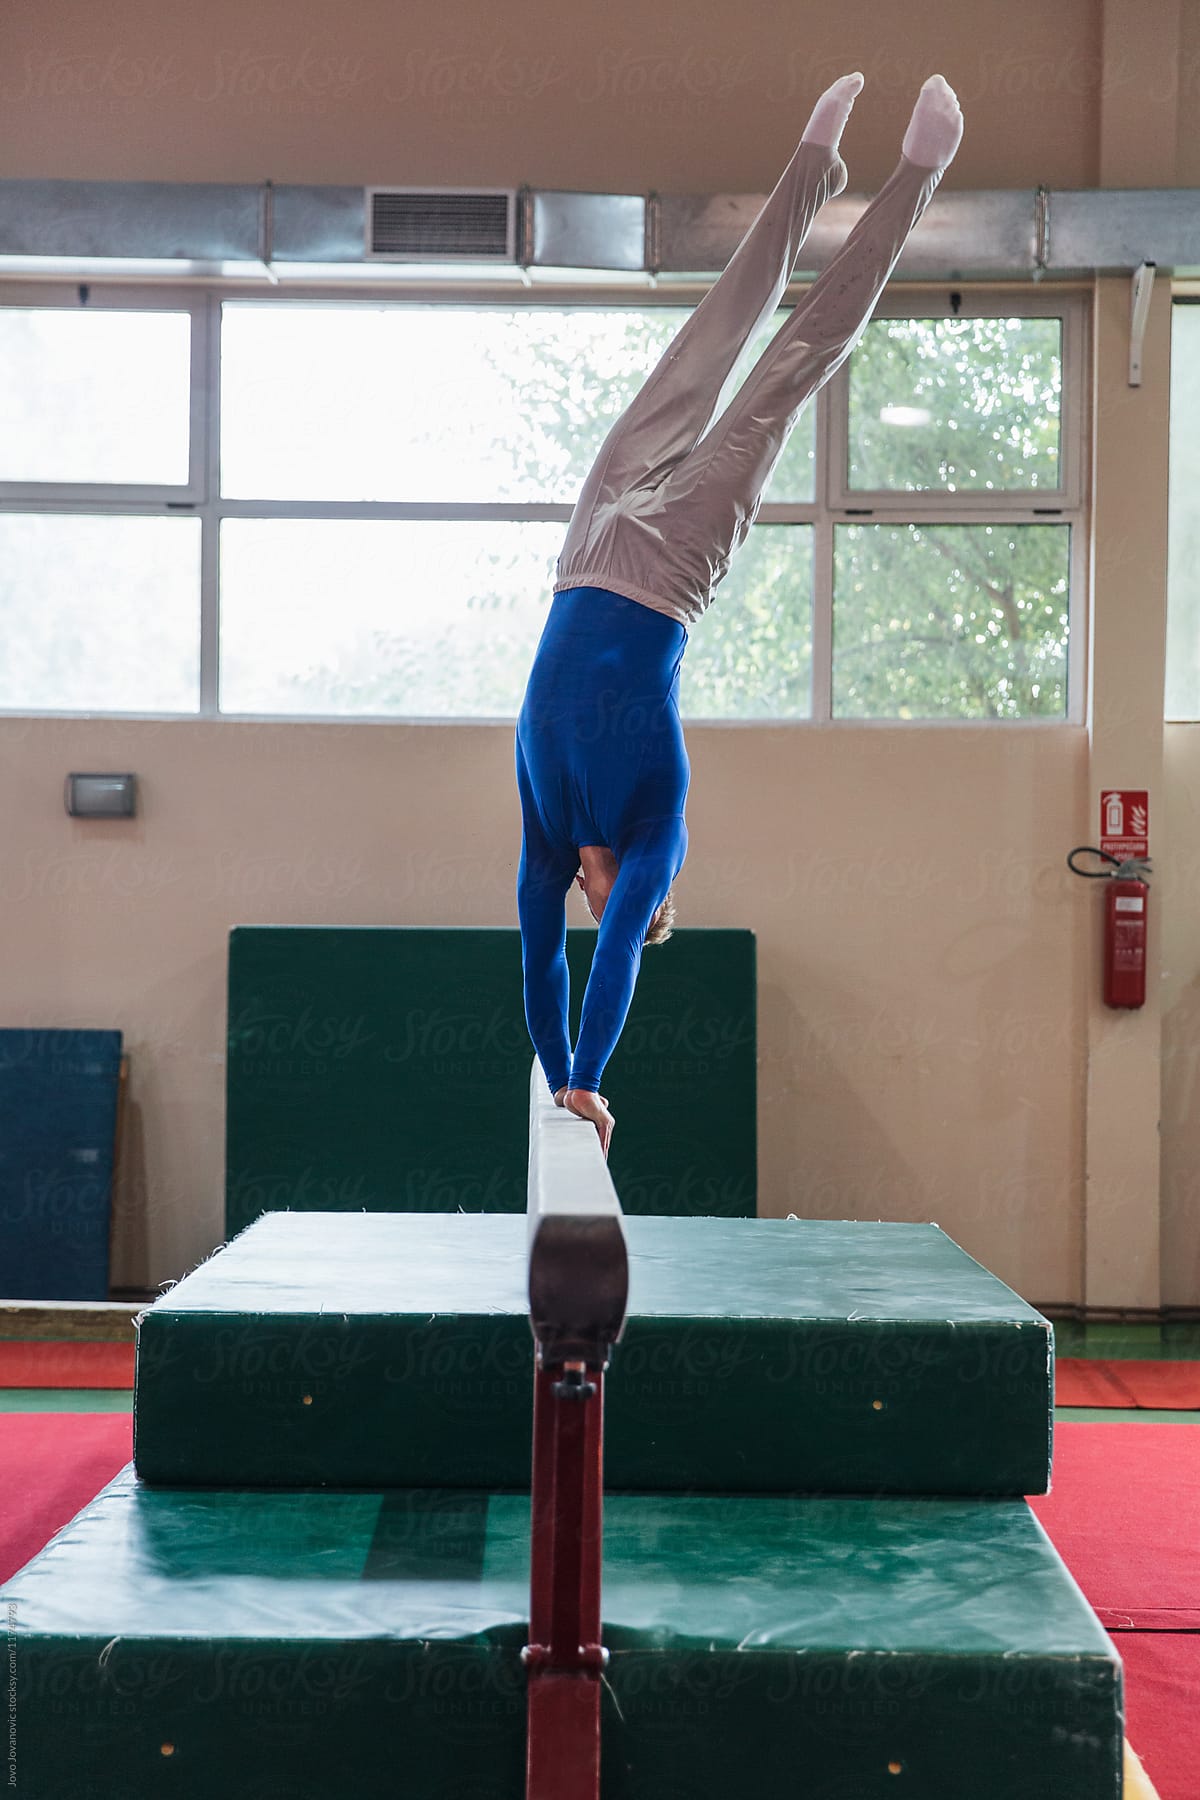 Young male gymnast dismounting off handstand